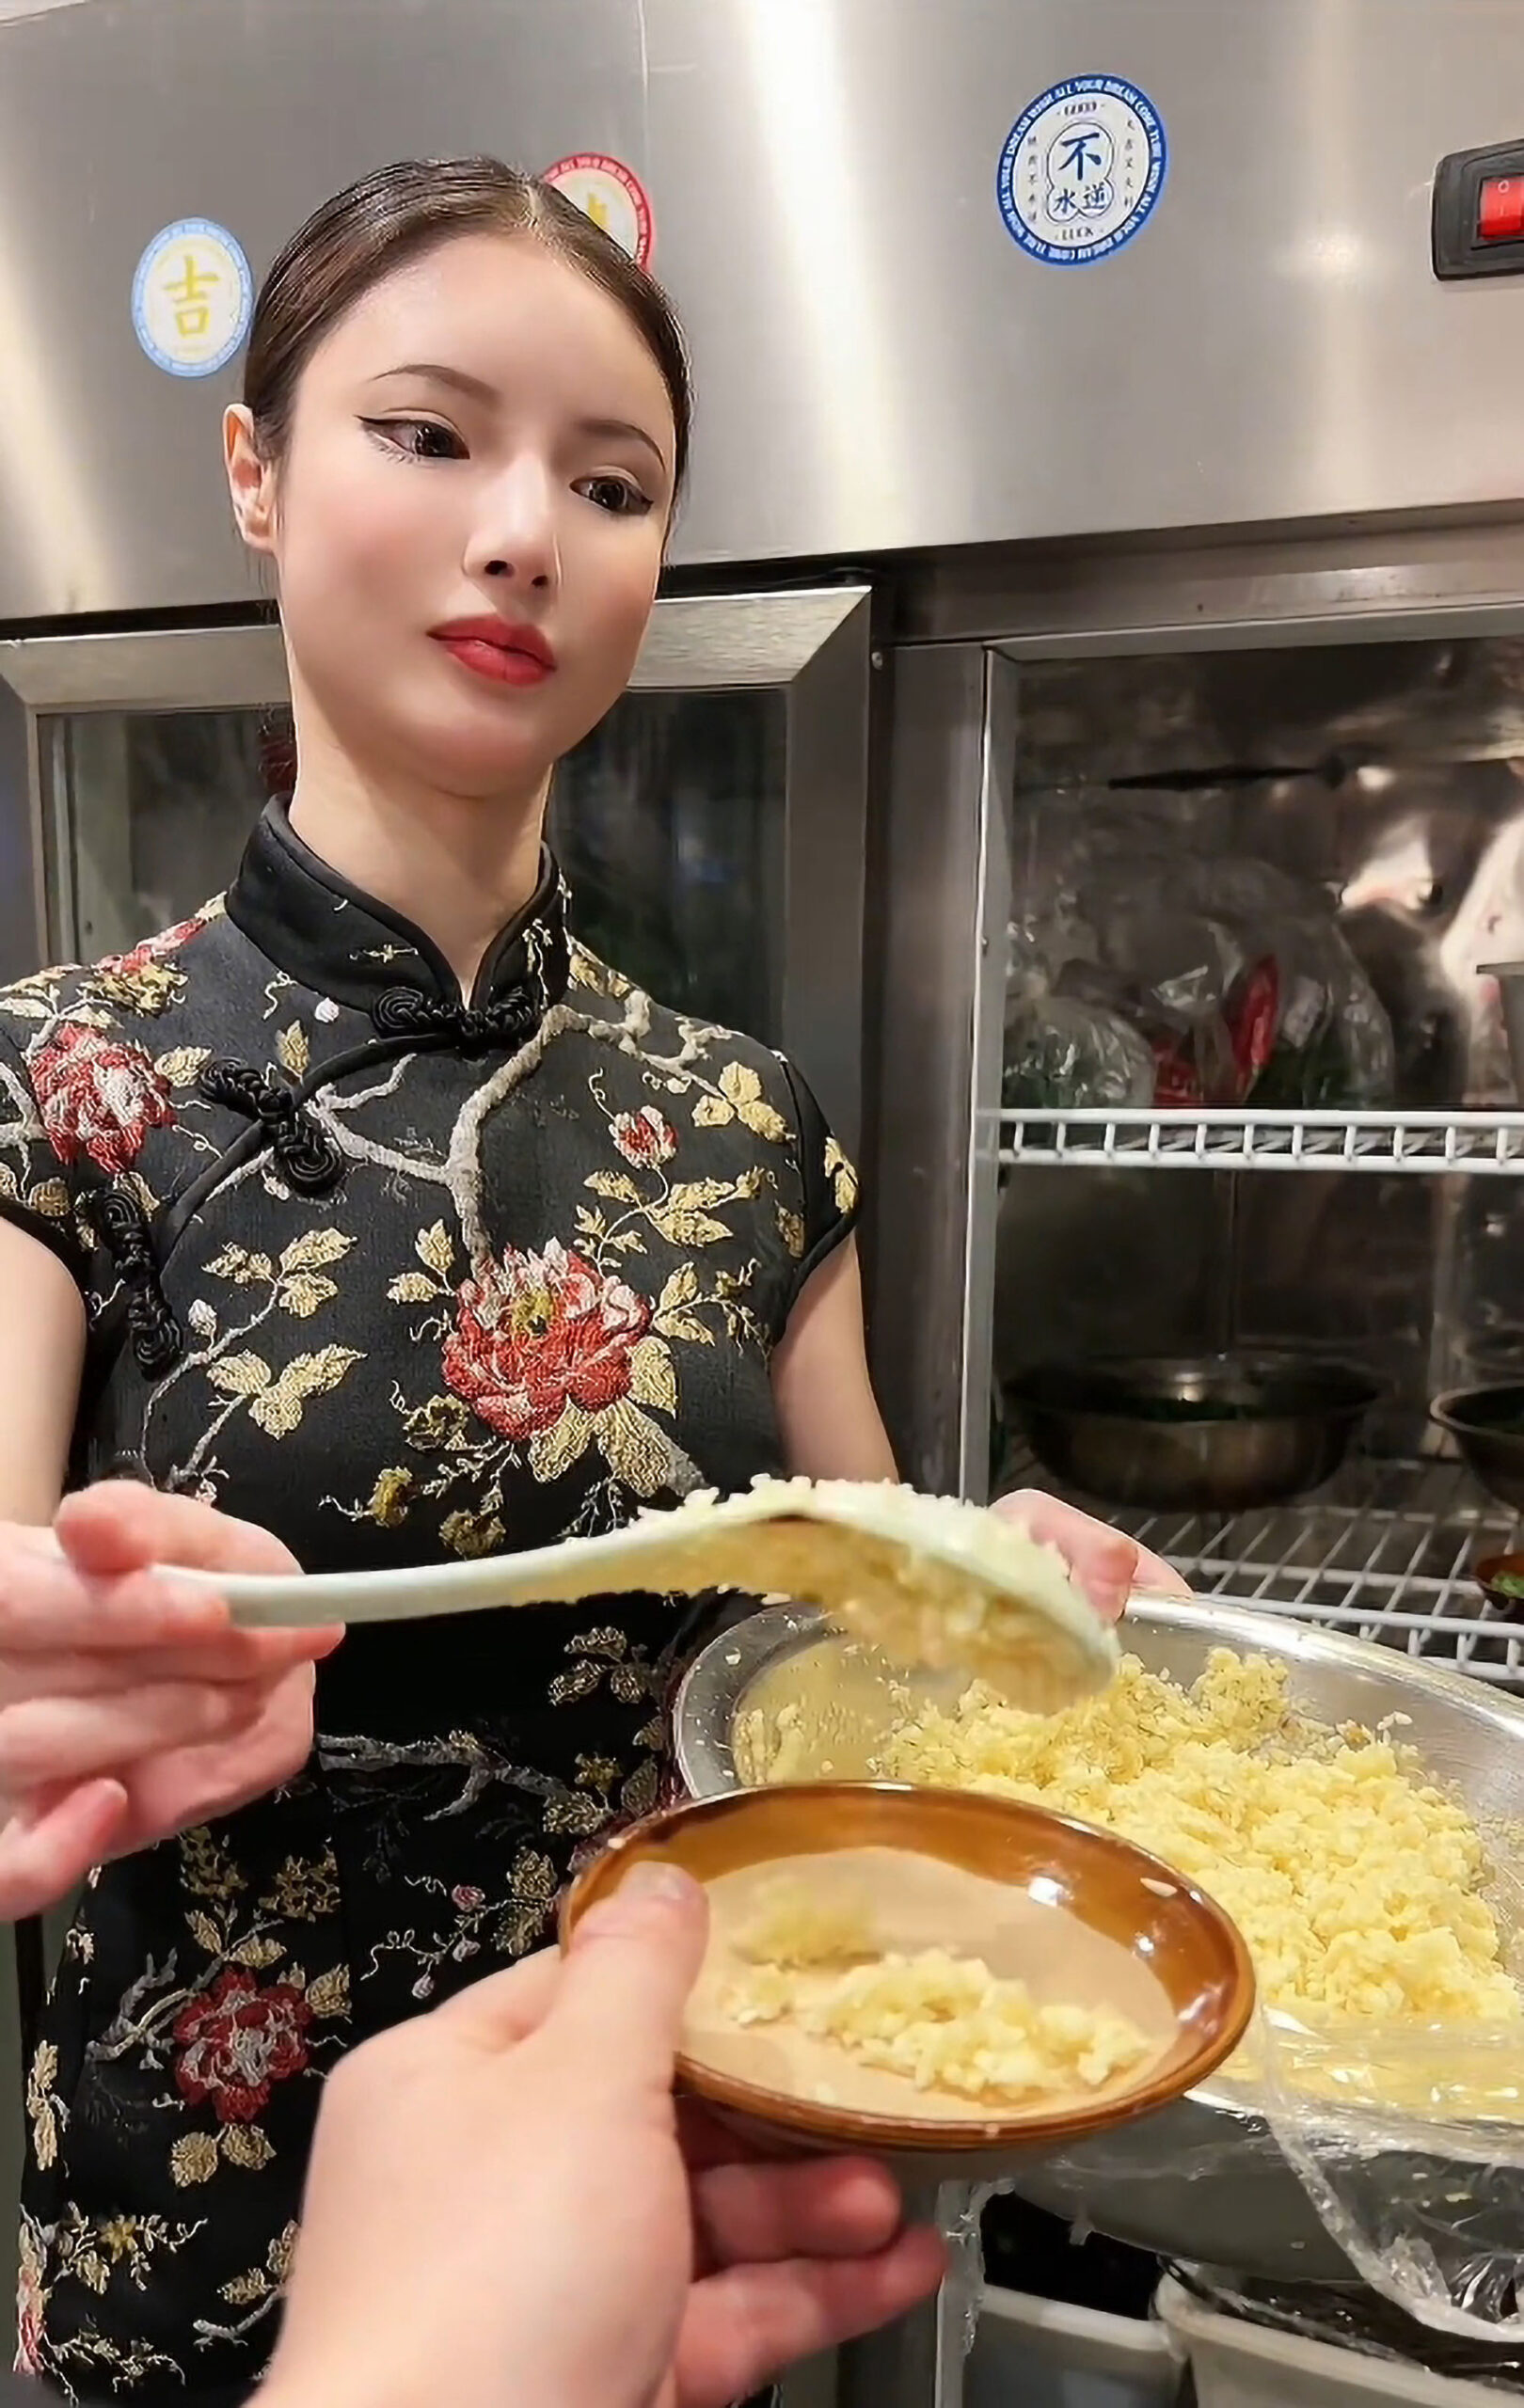 Read more about the article Young Chinese Woman’s Impressive Robotic Performance For Customers In Eatery